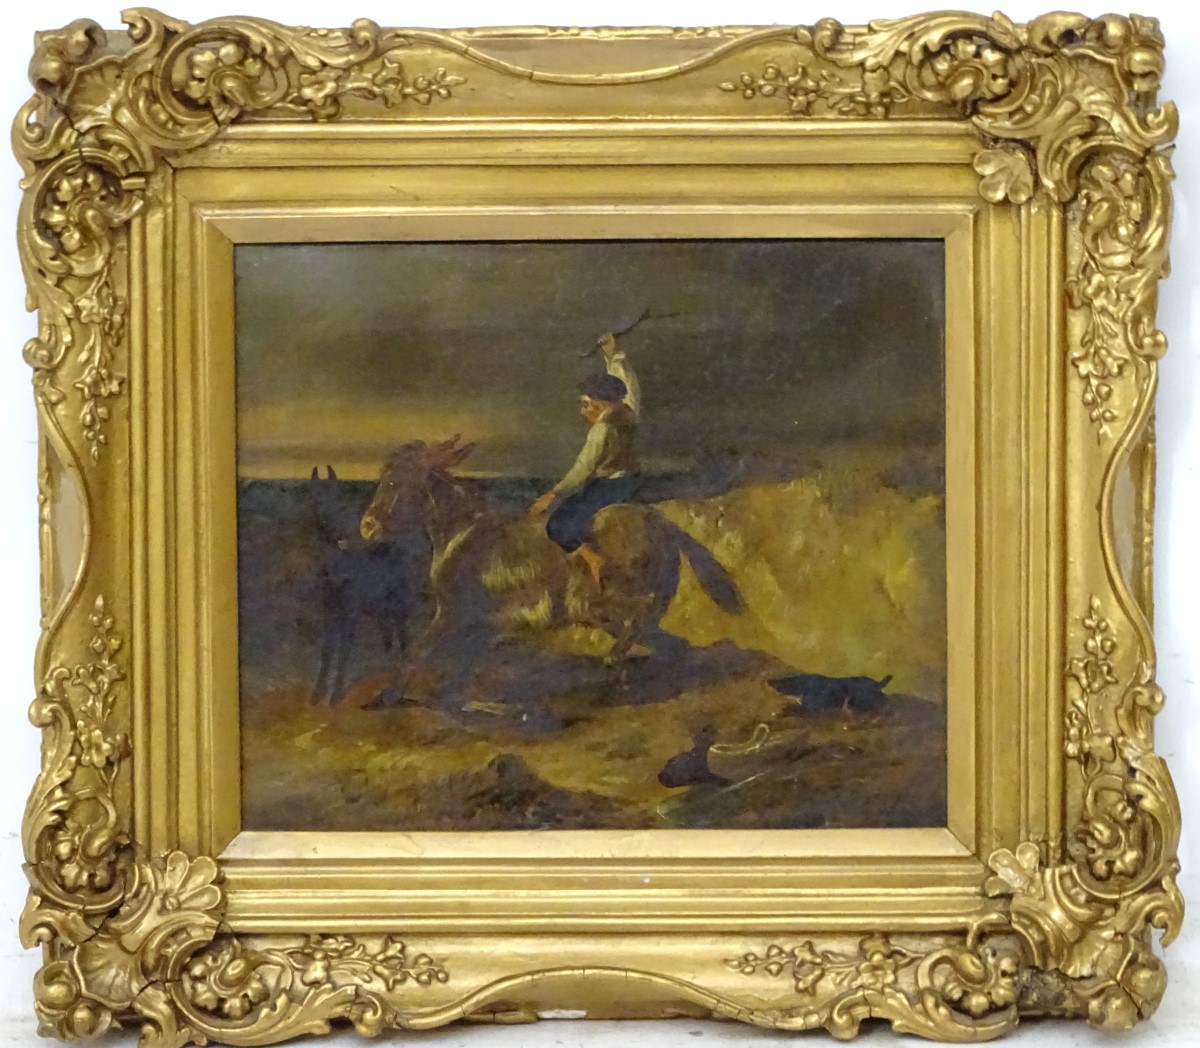 R A Bell (1815-1885) ?, Oil on canvas, The stubborn Donkey, Signed lower left. - Image 5 of 12